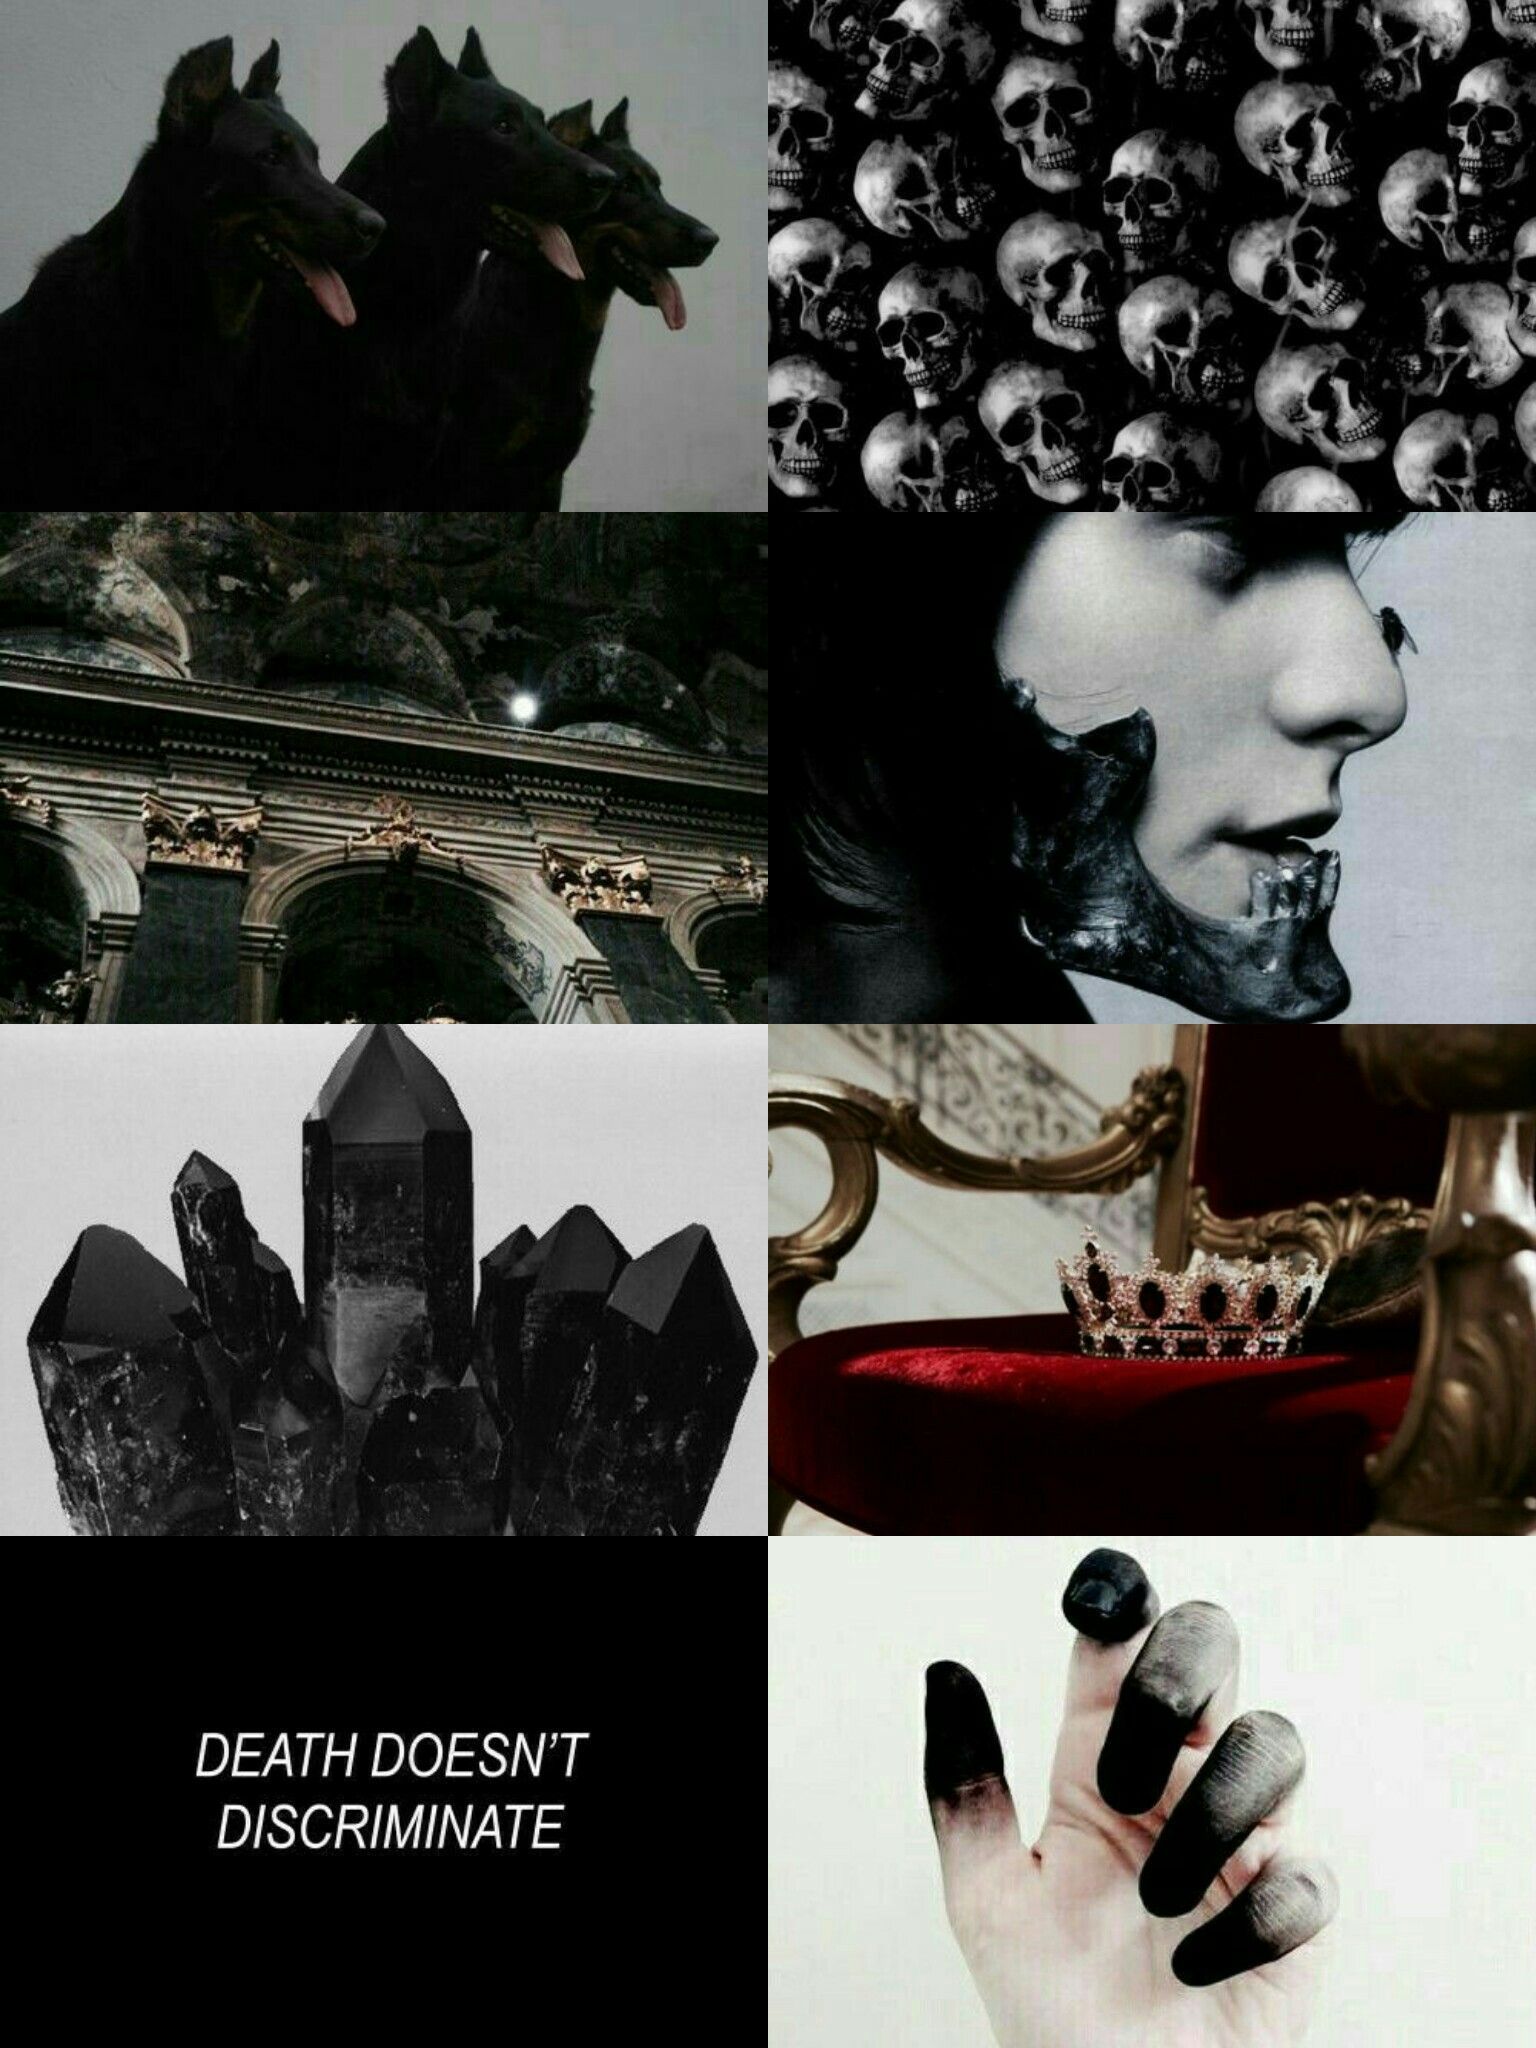 Aesthetic for the band black veil brides - Hades